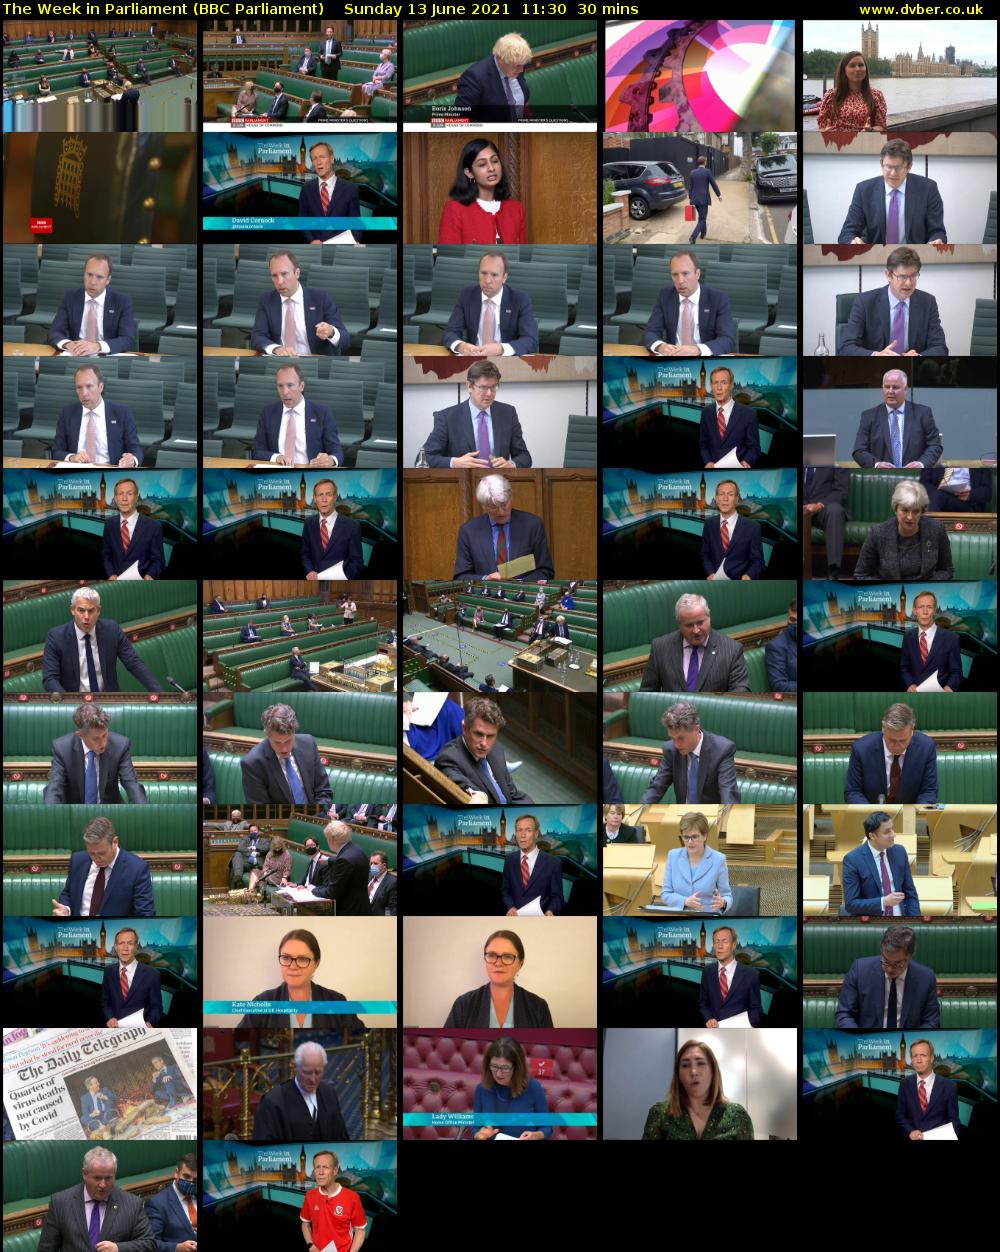 The Week in Parliament (BBC Parliament) Sunday 13 June 2021 11:30 - 12:00